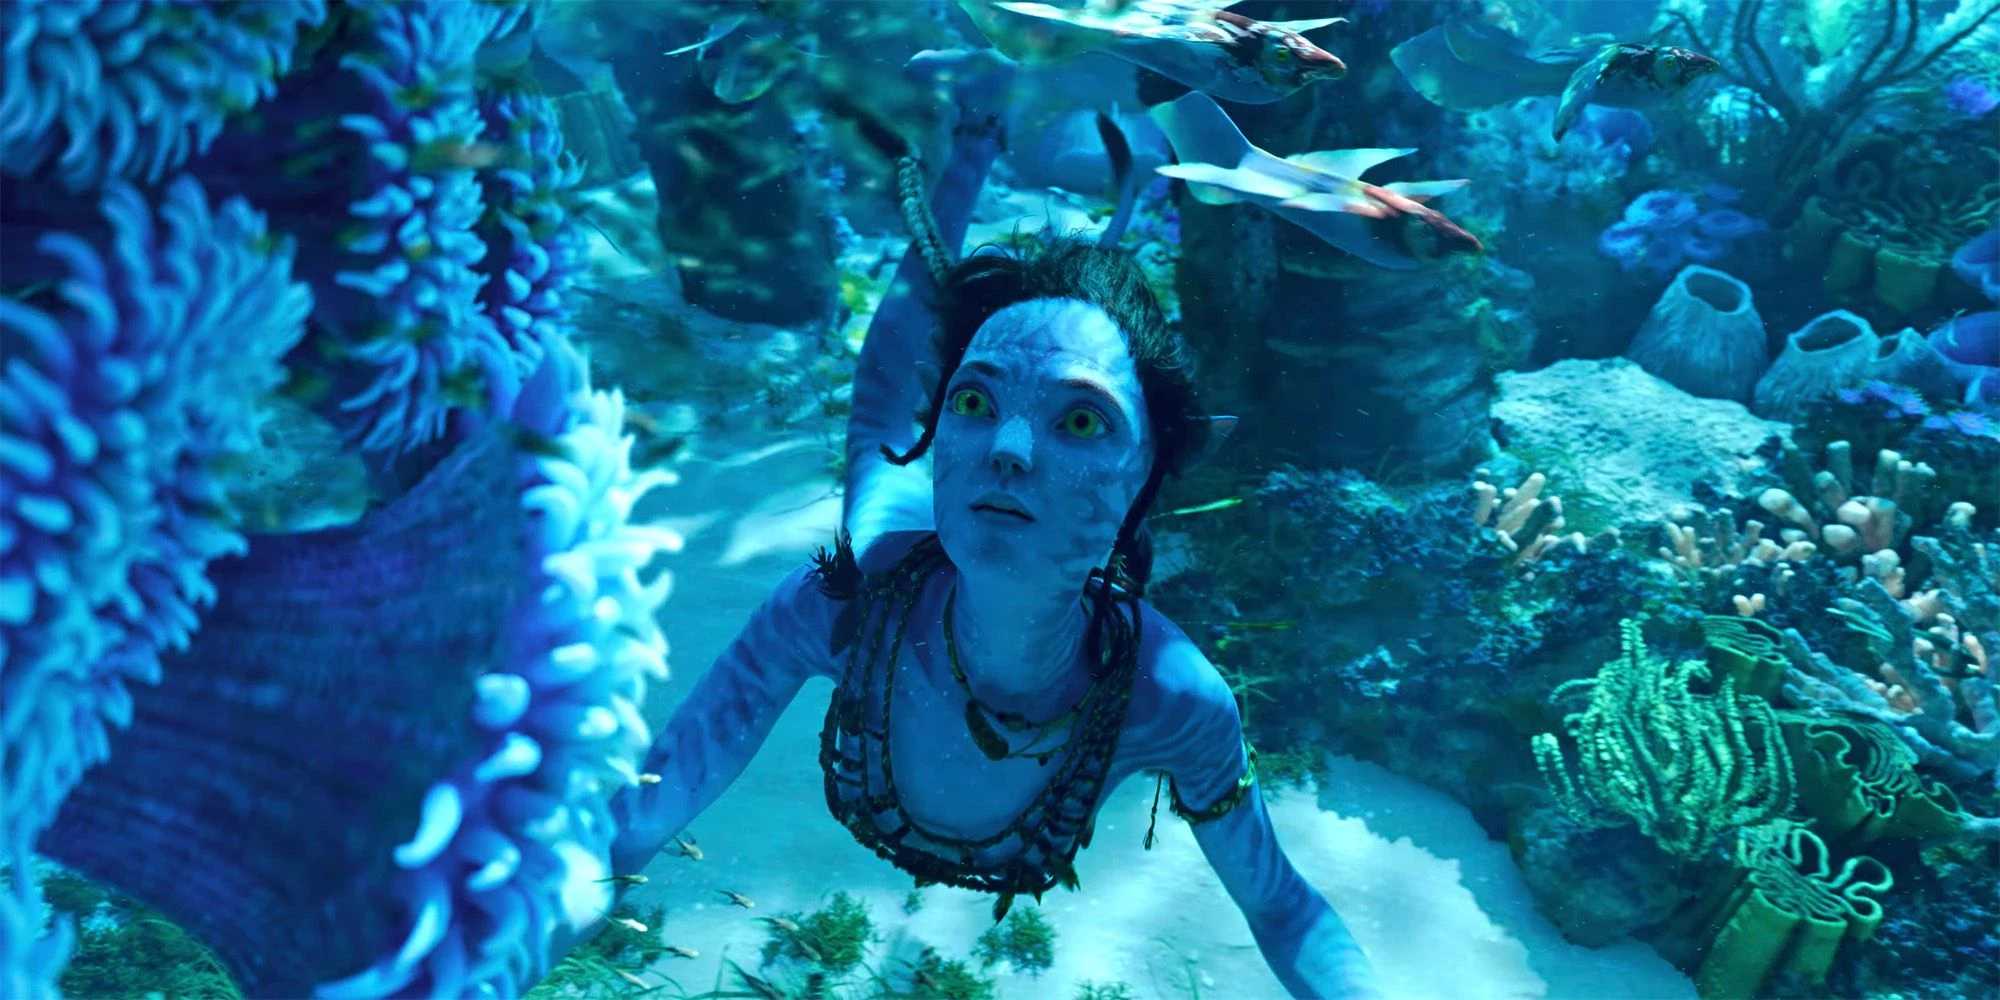 Avatar: The Way of Water latest trailer is out and it gives us our best look at the second battle for Pandora